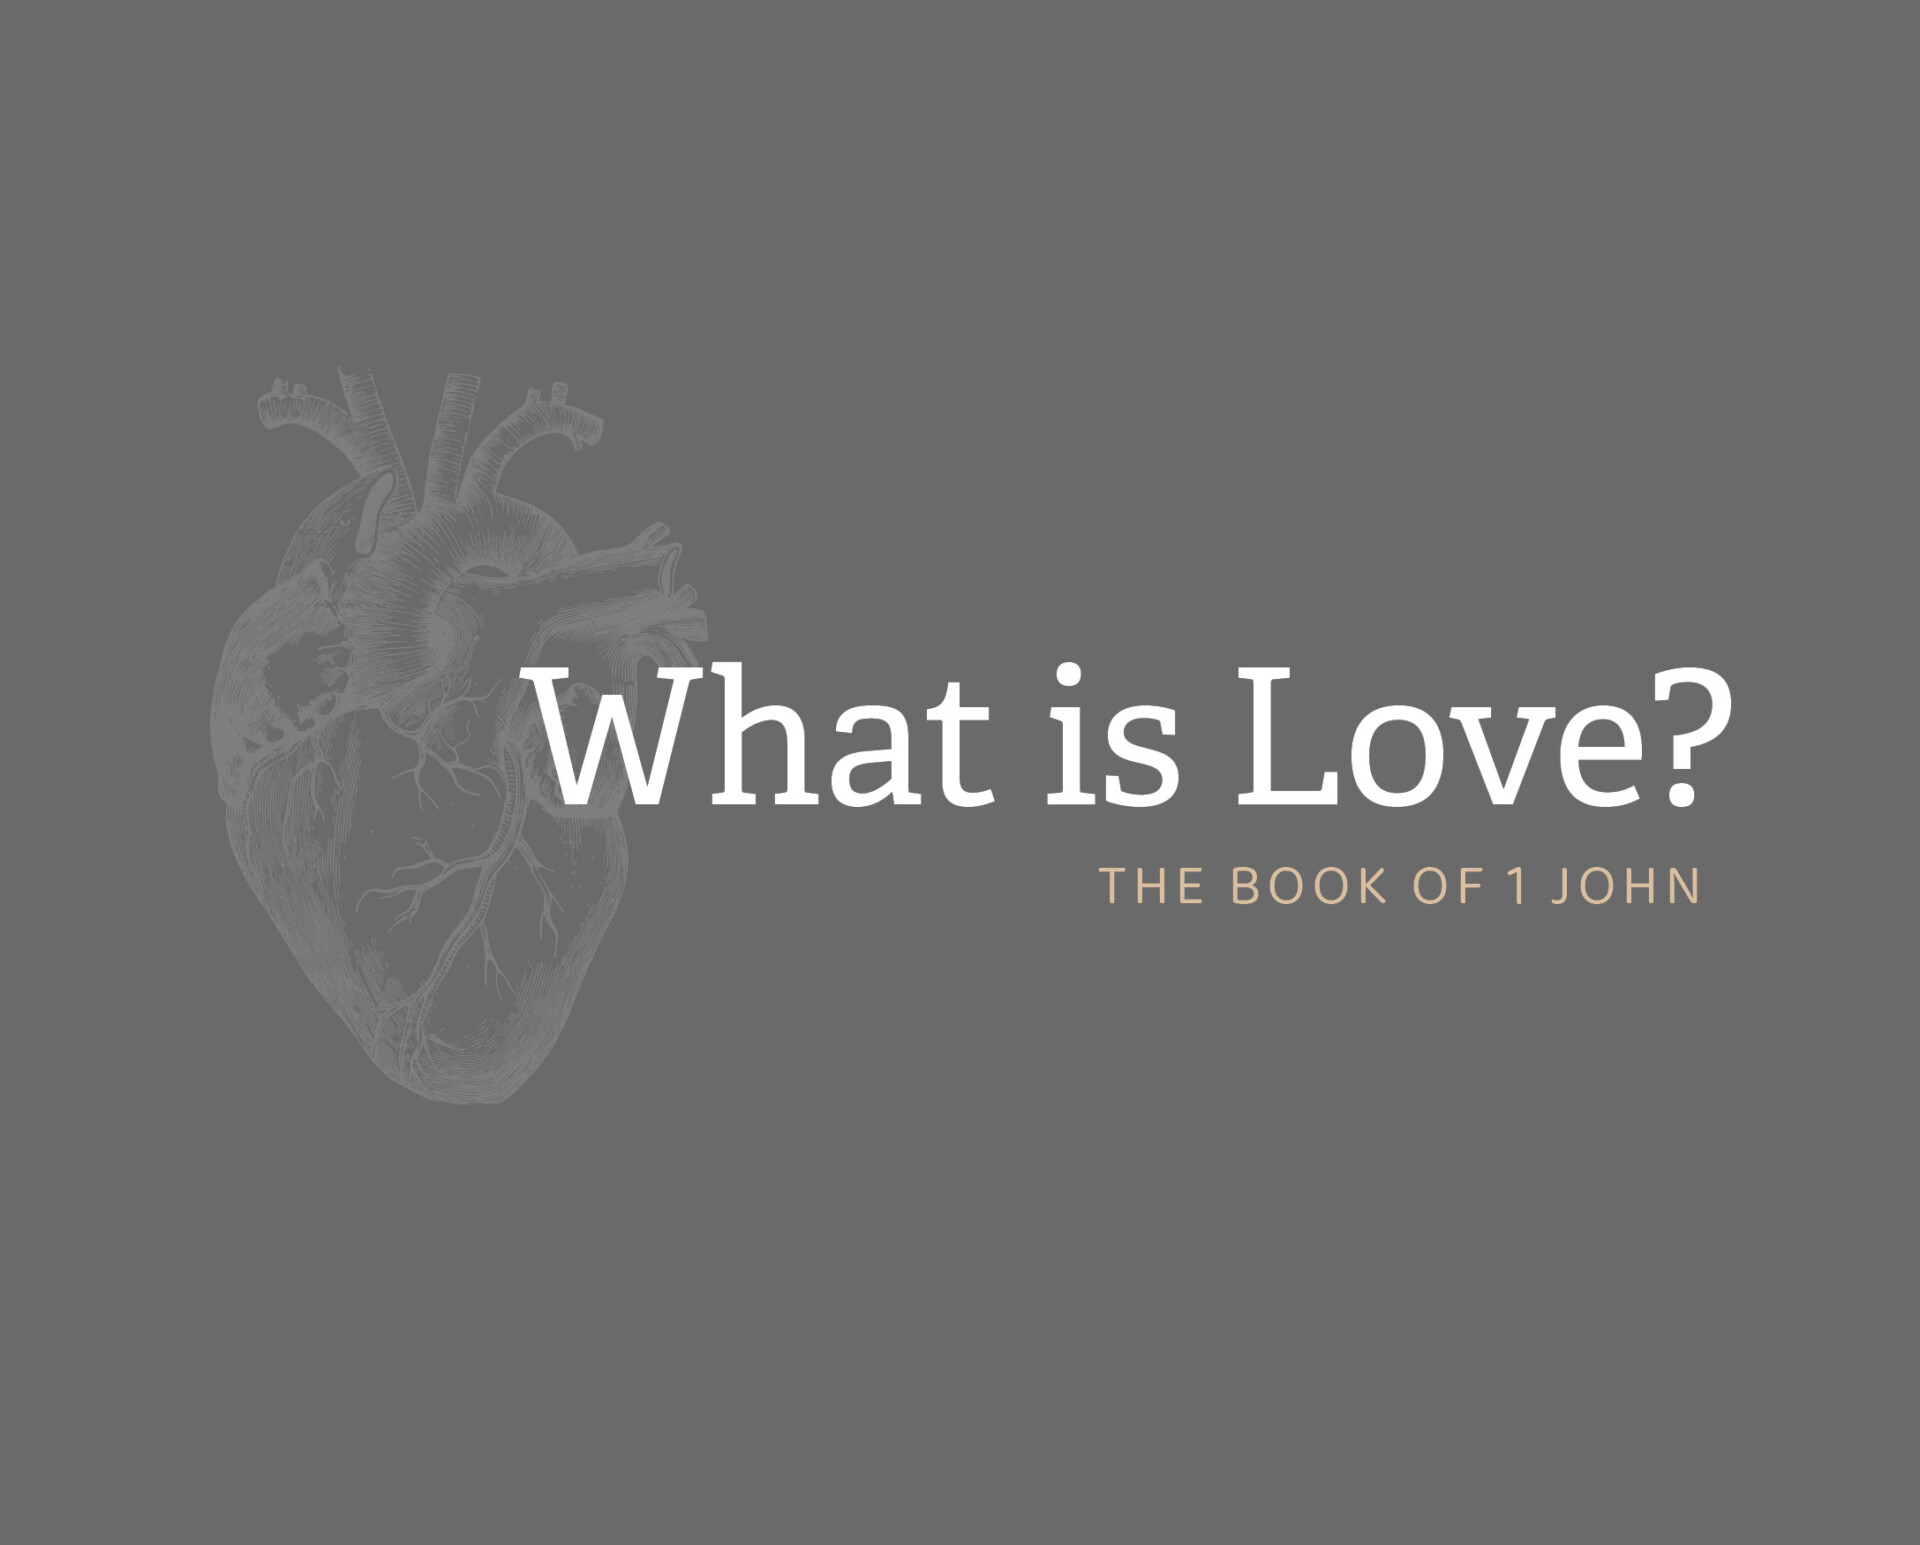 What Is Love? Walking in Darkness or Light